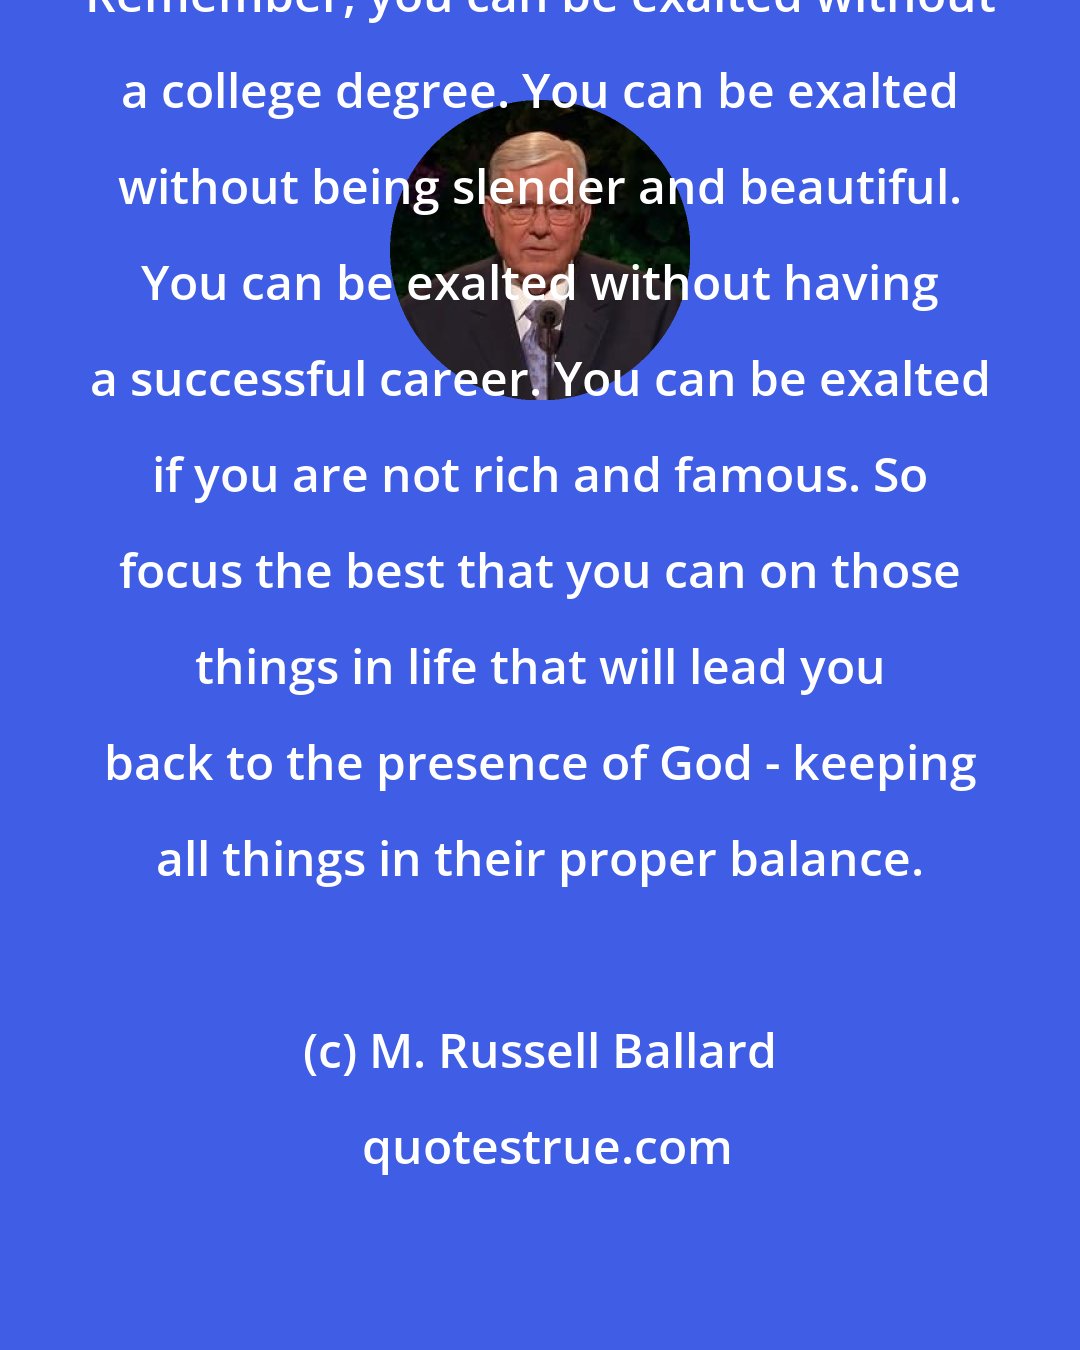 M. Russell Ballard: Remember, you can be exalted without a college degree. You can be exalted without being slender and beautiful. You can be exalted without having a successful career. You can be exalted if you are not rich and famous. So focus the best that you can on those things in life that will lead you back to the presence of God - keeping all things in their proper balance.